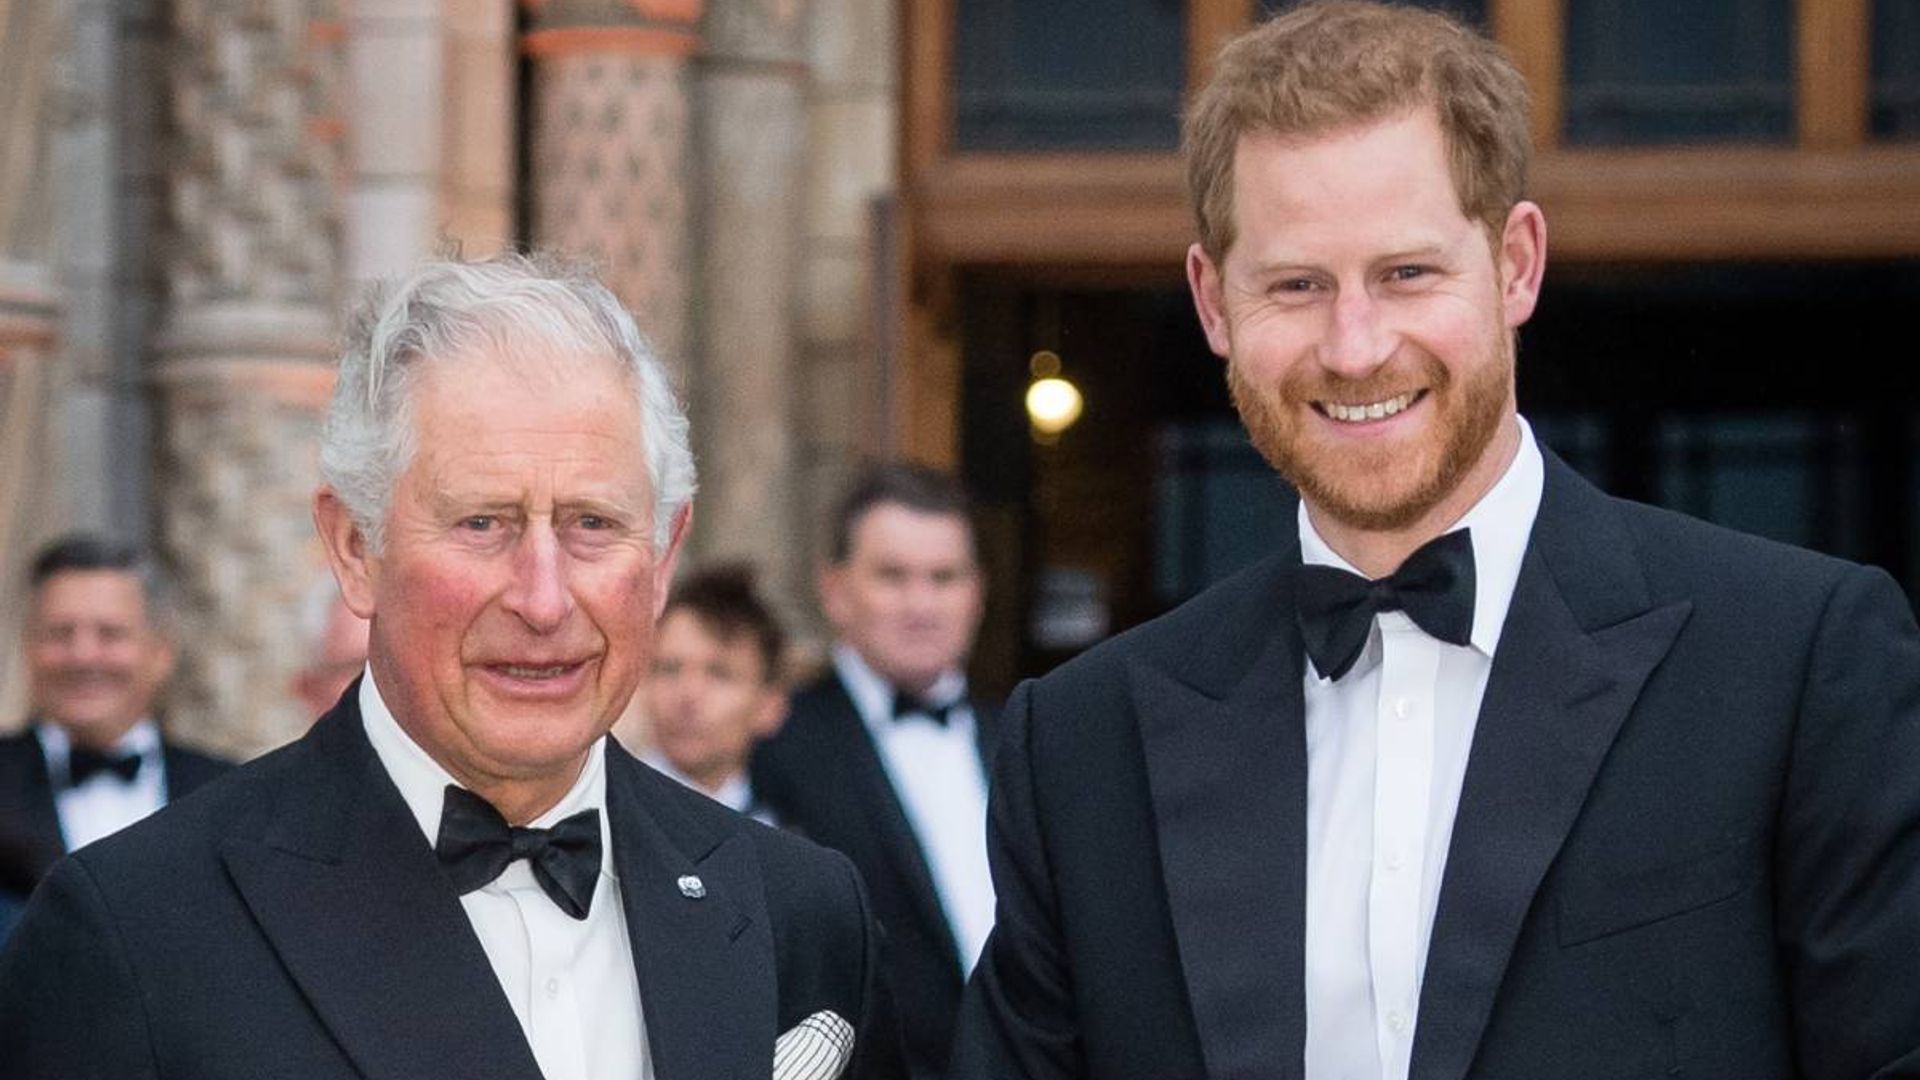 Prince Charles looks JUST like Prince Harry in amazing royal family throwback photo | HELLO!